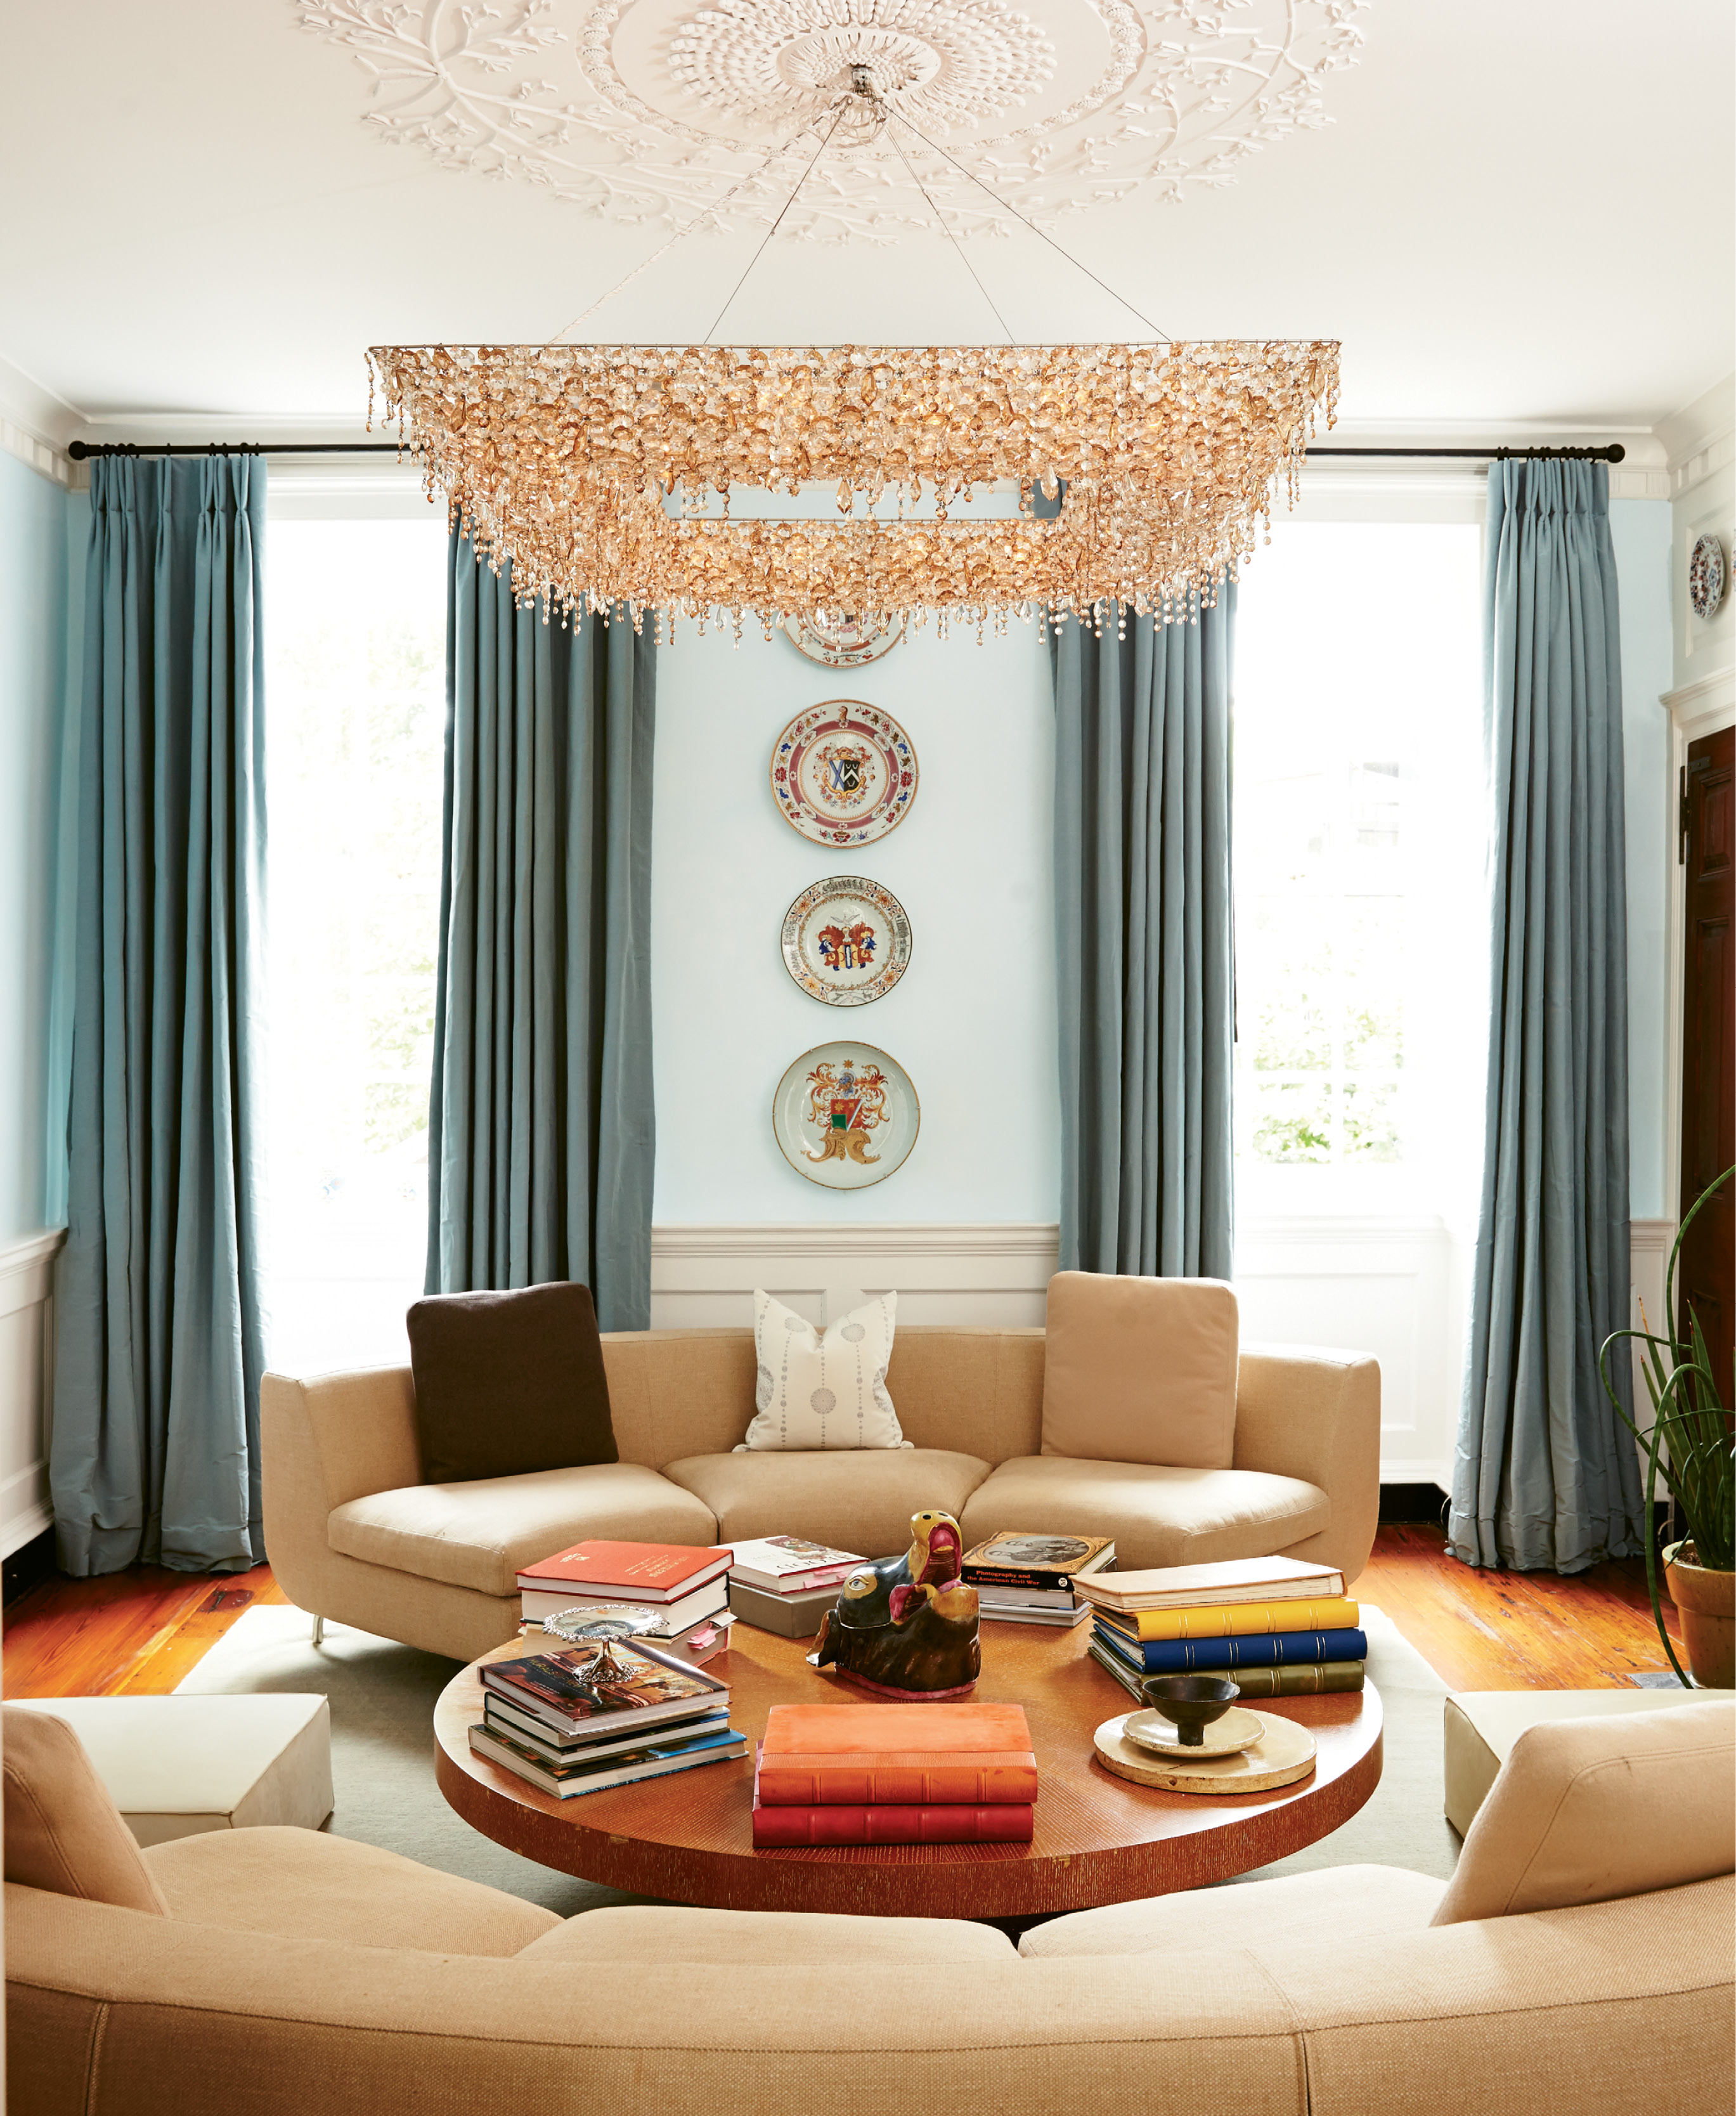 HIGH, LOW, &amp; IN BETWEEN: The Pollaks enlisted jewelry designer and friend James de Givenchy to help them choose décor in keeping with their eclectic personal style. In the living room, a glittering chandelier and Suzanne’s collection of 18th-century Chinese porcelain keep company with a coffee table from Crate &amp; Barrel.